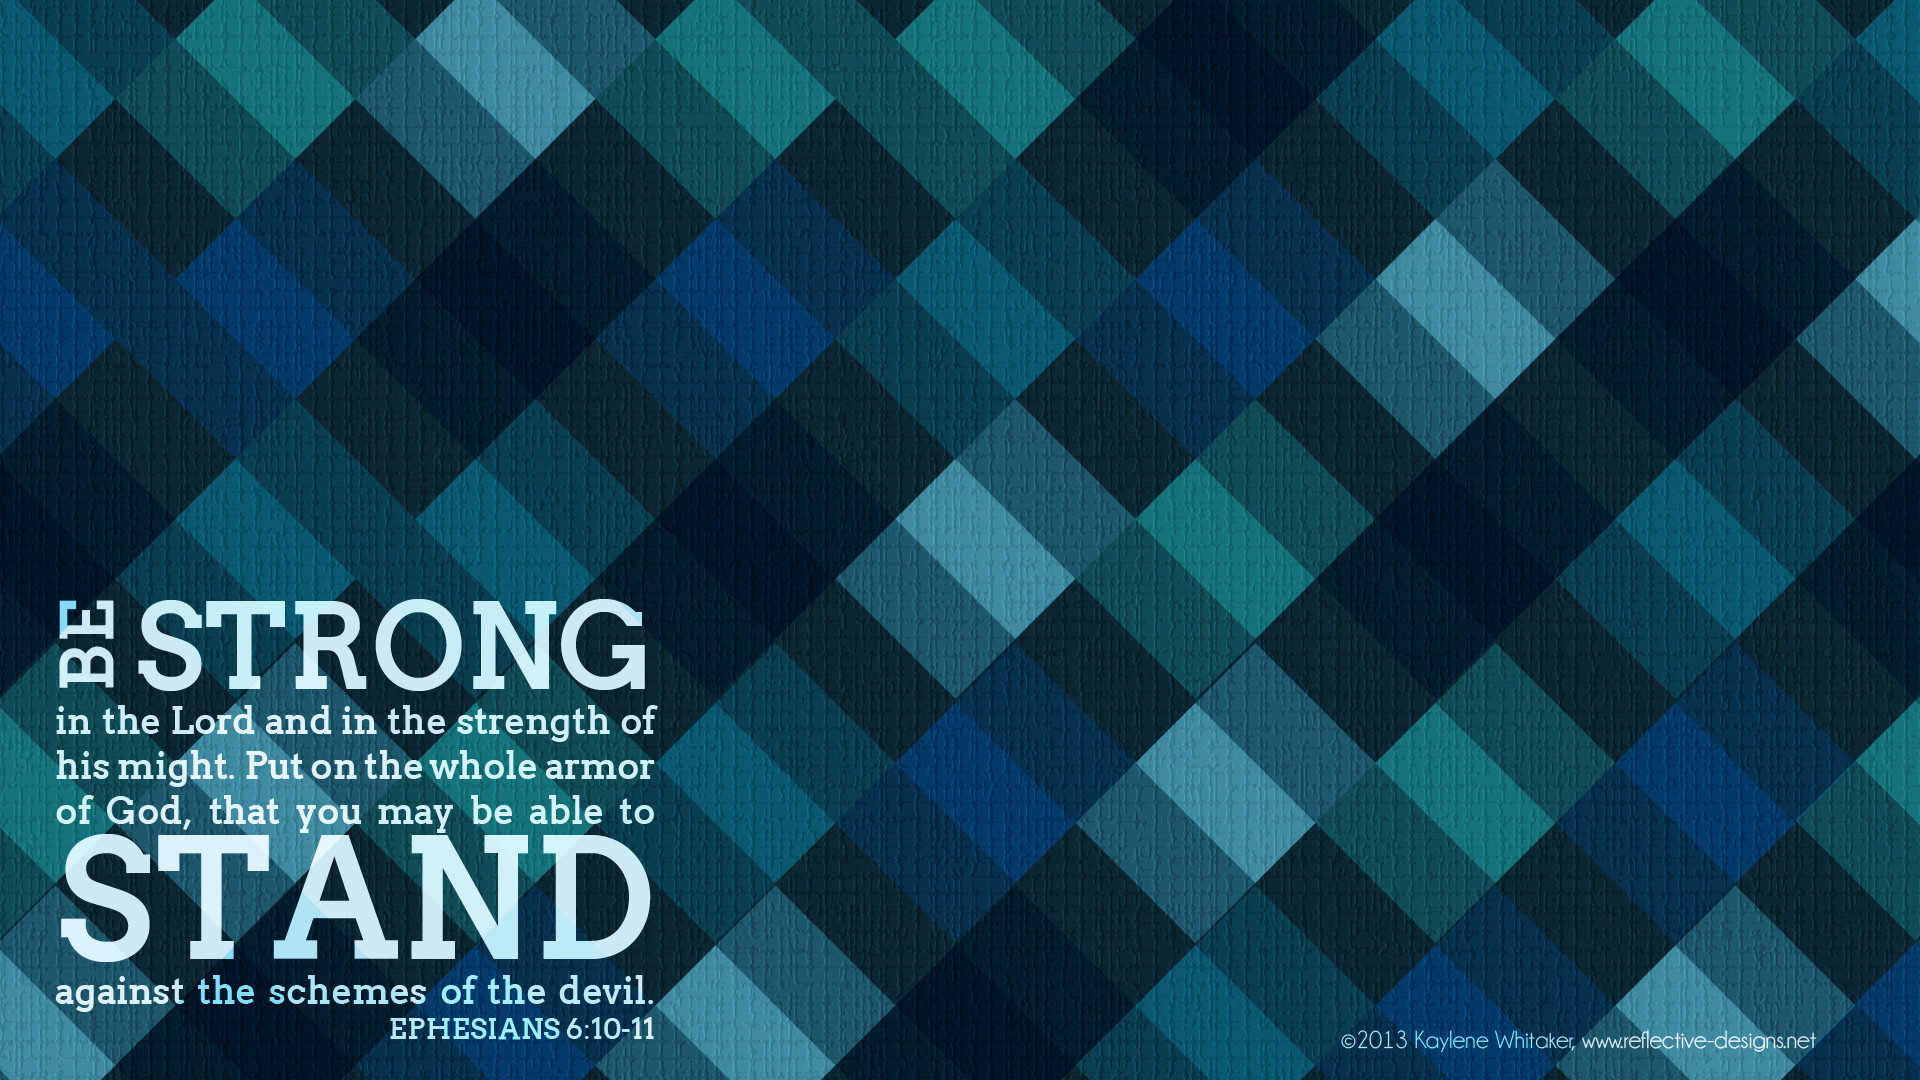 1920x1080 Be strong in the Lord desktop wallpaper from www.reflective-designs.net